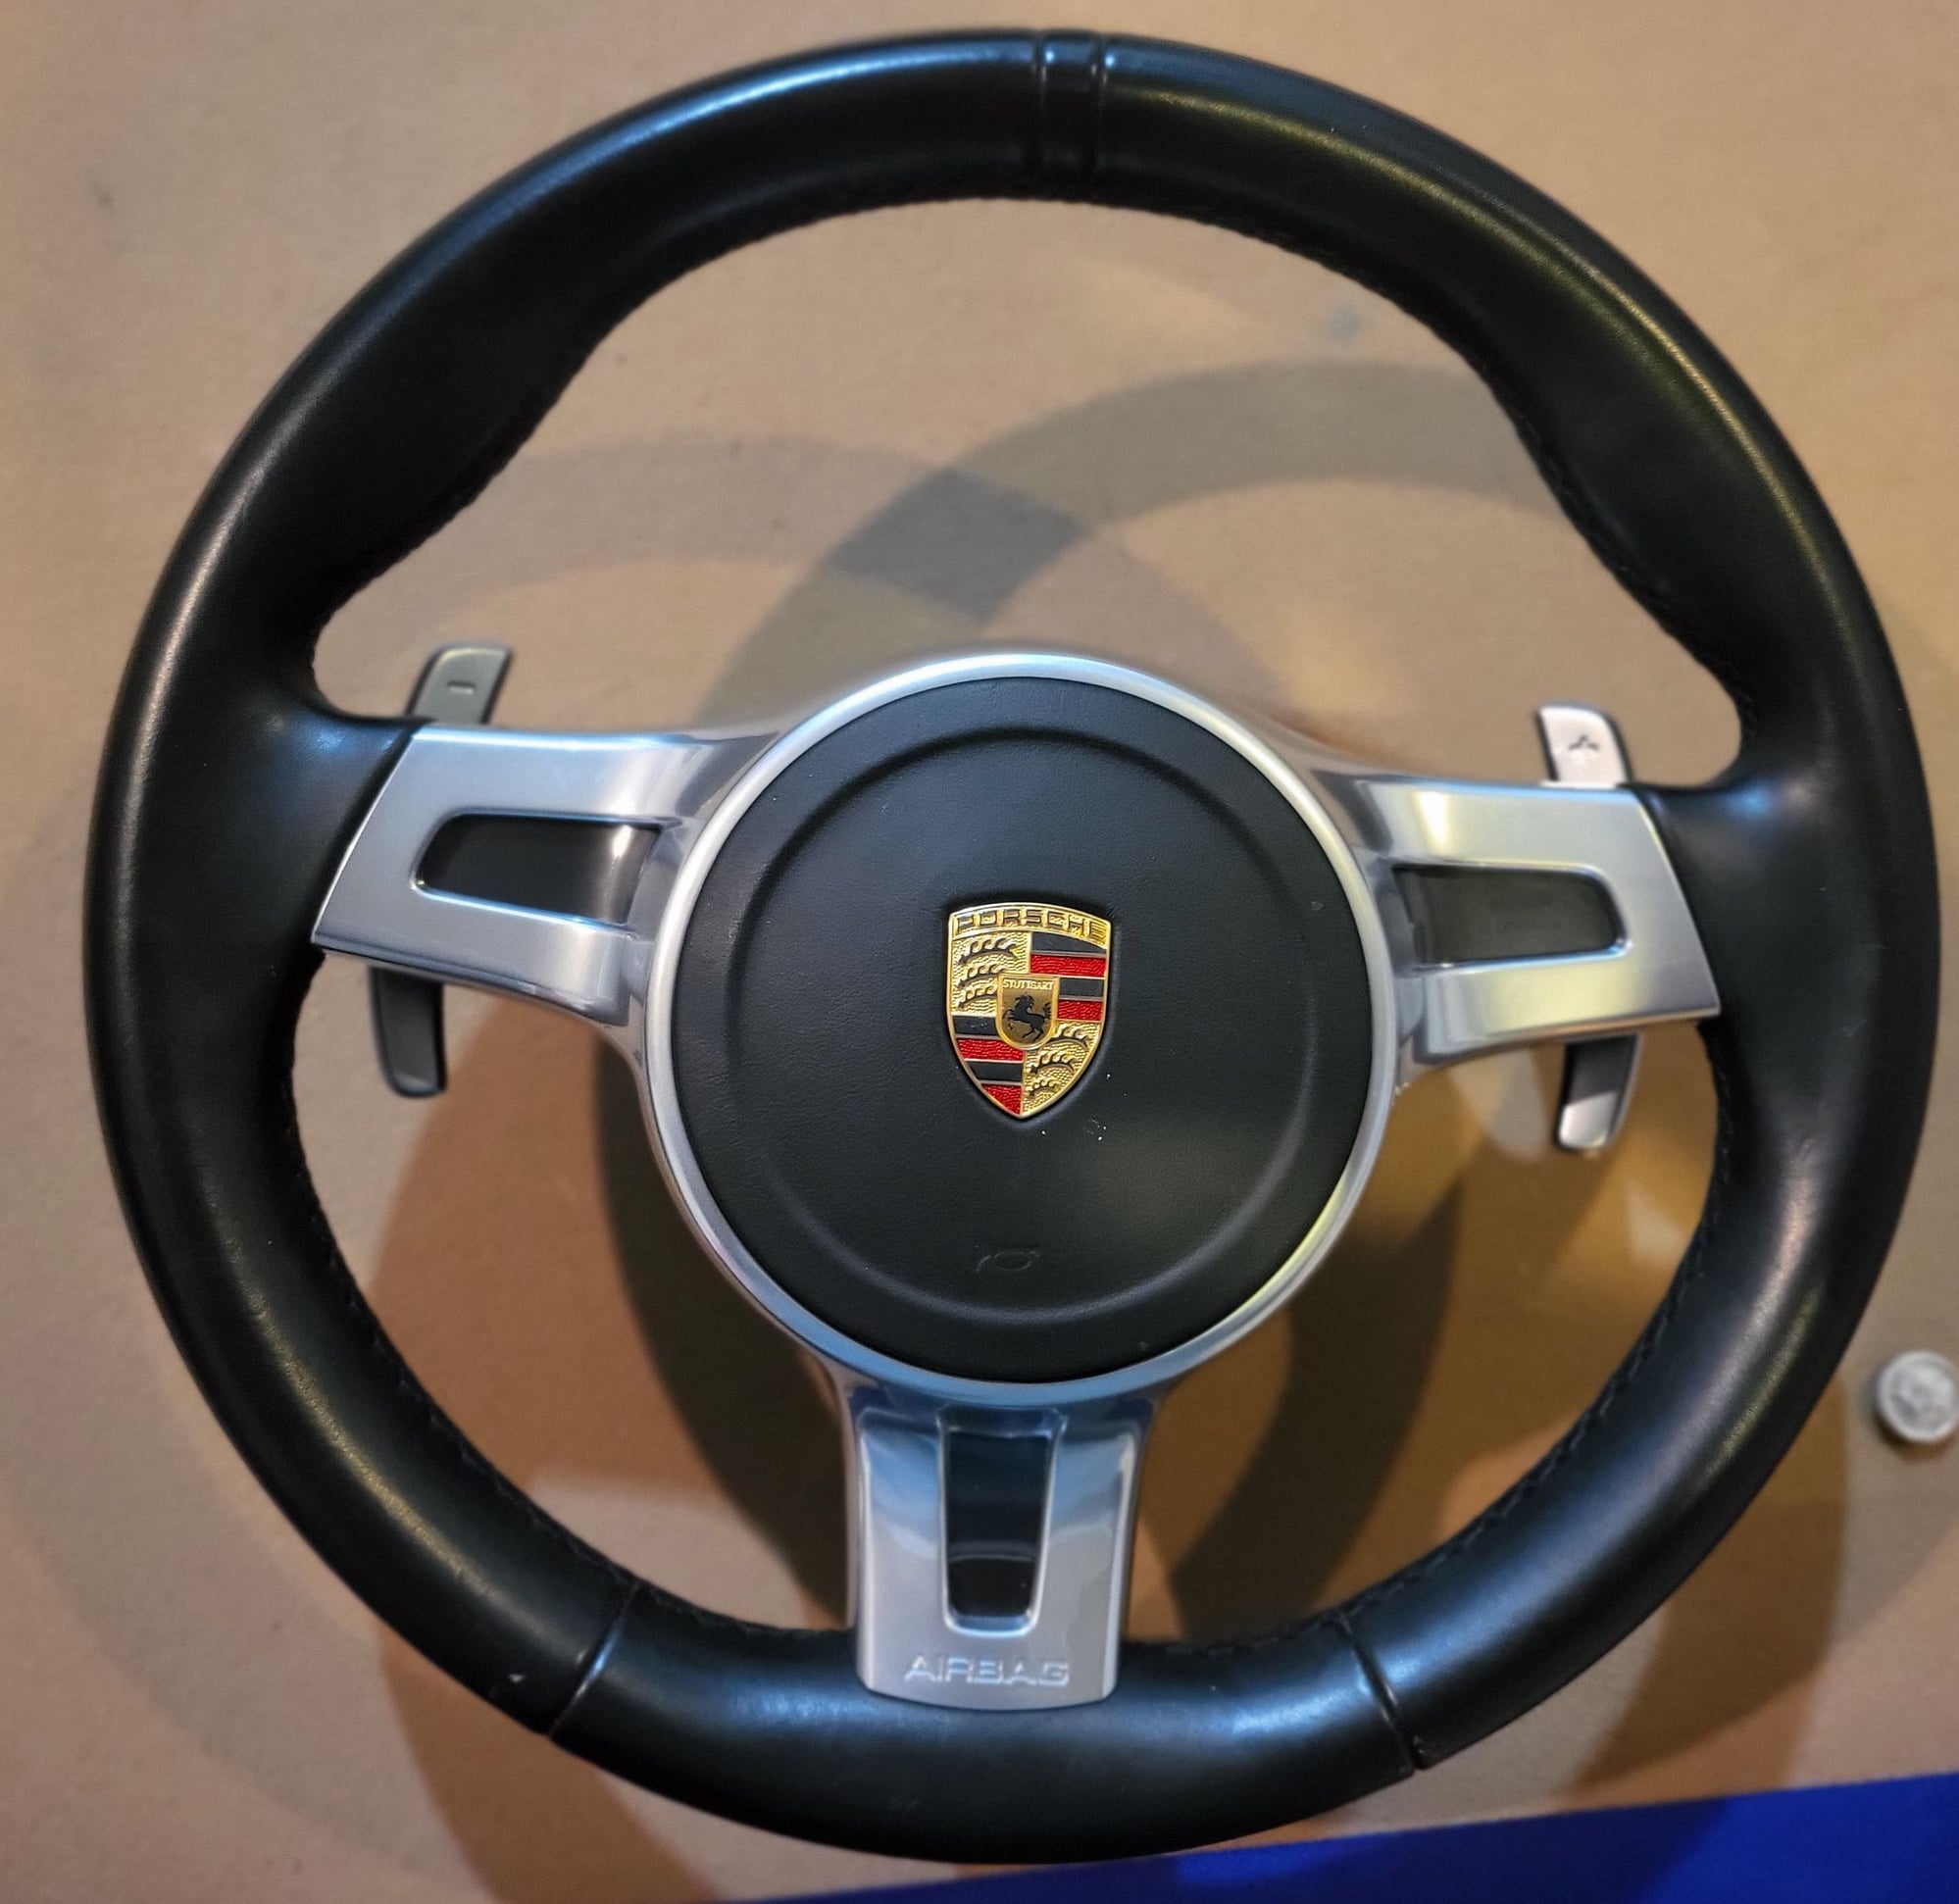 Steering/Suspension - Used OEM Porsche 911 991.1 PDK Steering Wheel Airbag Included - Used - 2013 to 2019 Porsche 911 - 2011 to 2019 Porsche Macan - 2013 to 2016 Porsche 718 Boxster - 2013 to 2016 Porsche Cayman - North Las Vegas, NV 89084, United States